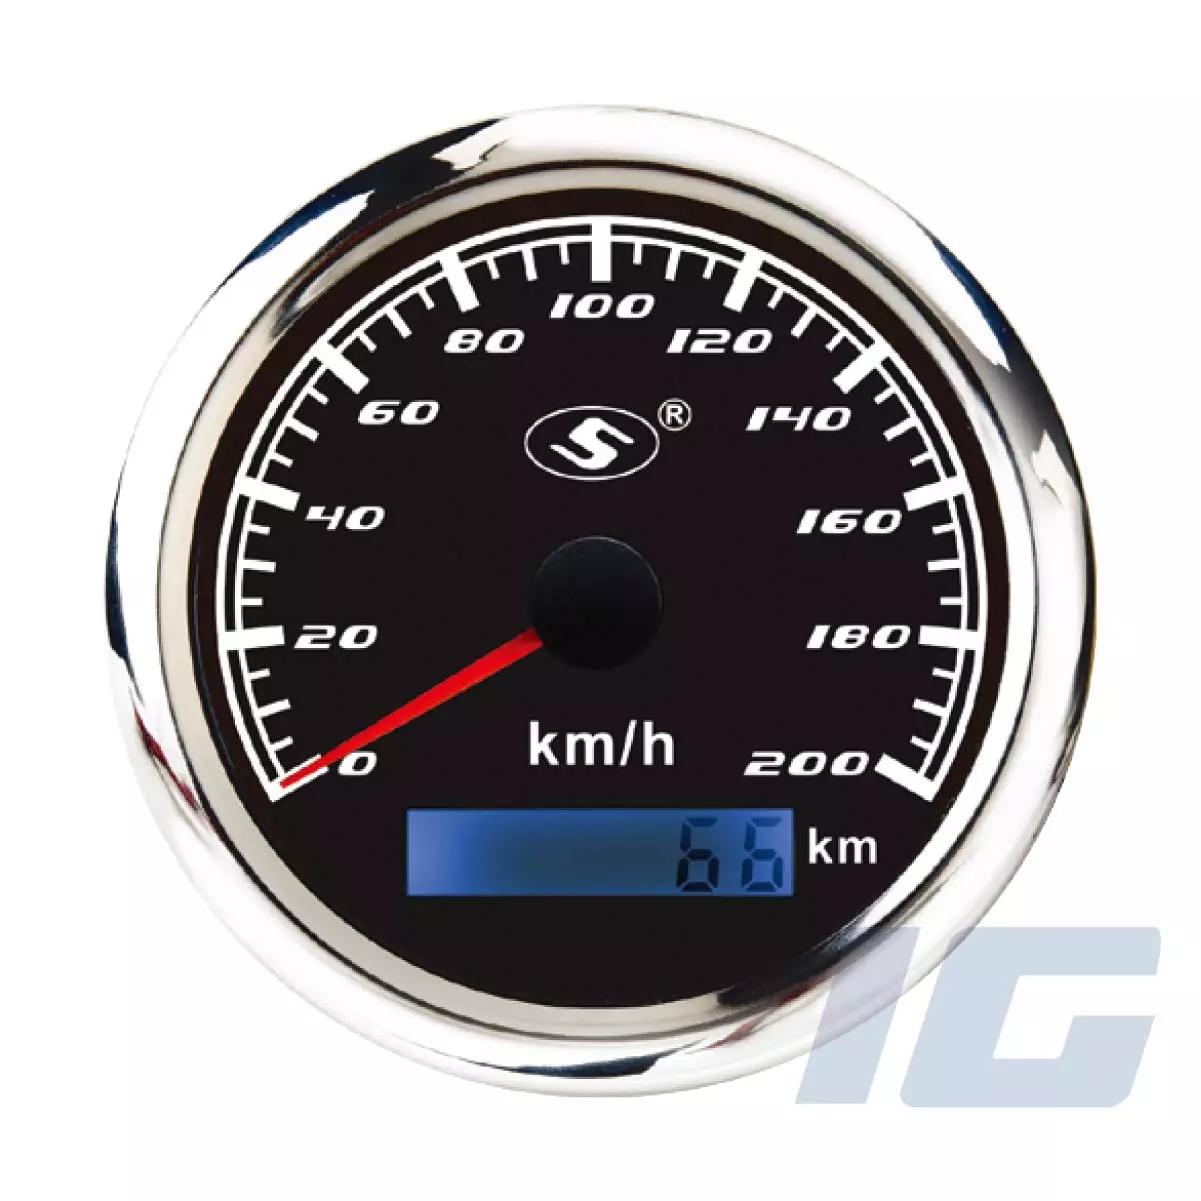 PRO Series 85mm Aftermarket Gauge - Speedometer With Odometer for Car, Truck, Automobile